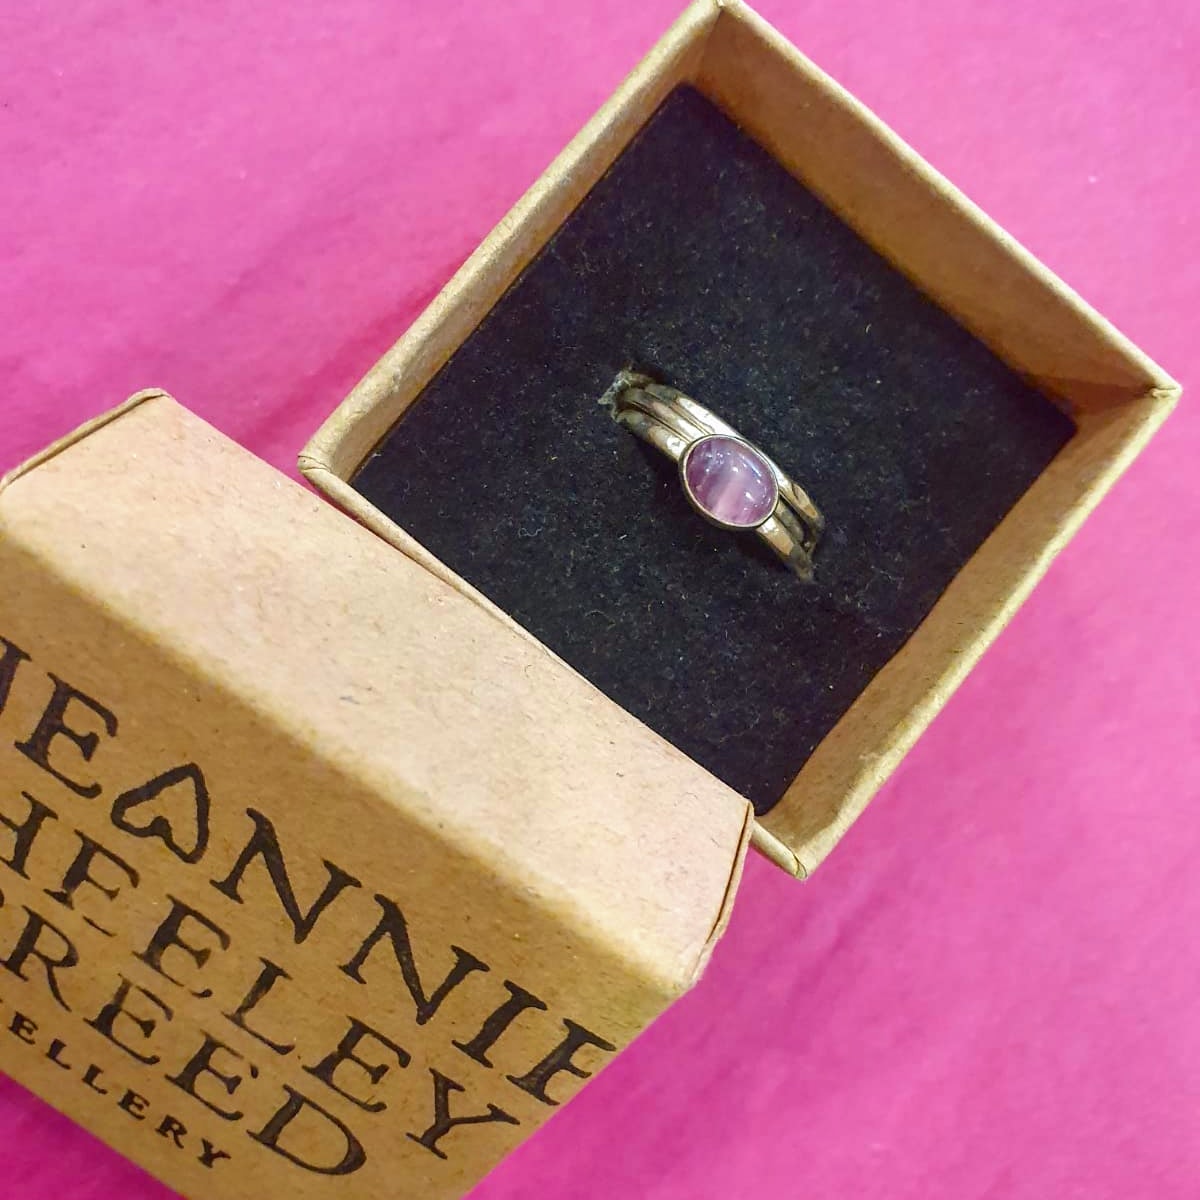 Stunning #jewellery flying out of #CherrydidiKeswick this morning! 
Fluorite triple ring by #jeannieheeleycreed ... just beautiful!  
#localjeweller #shoplocal #fluorite 
@LiveShopLocal @NotJustLakes @hmuk_crafters